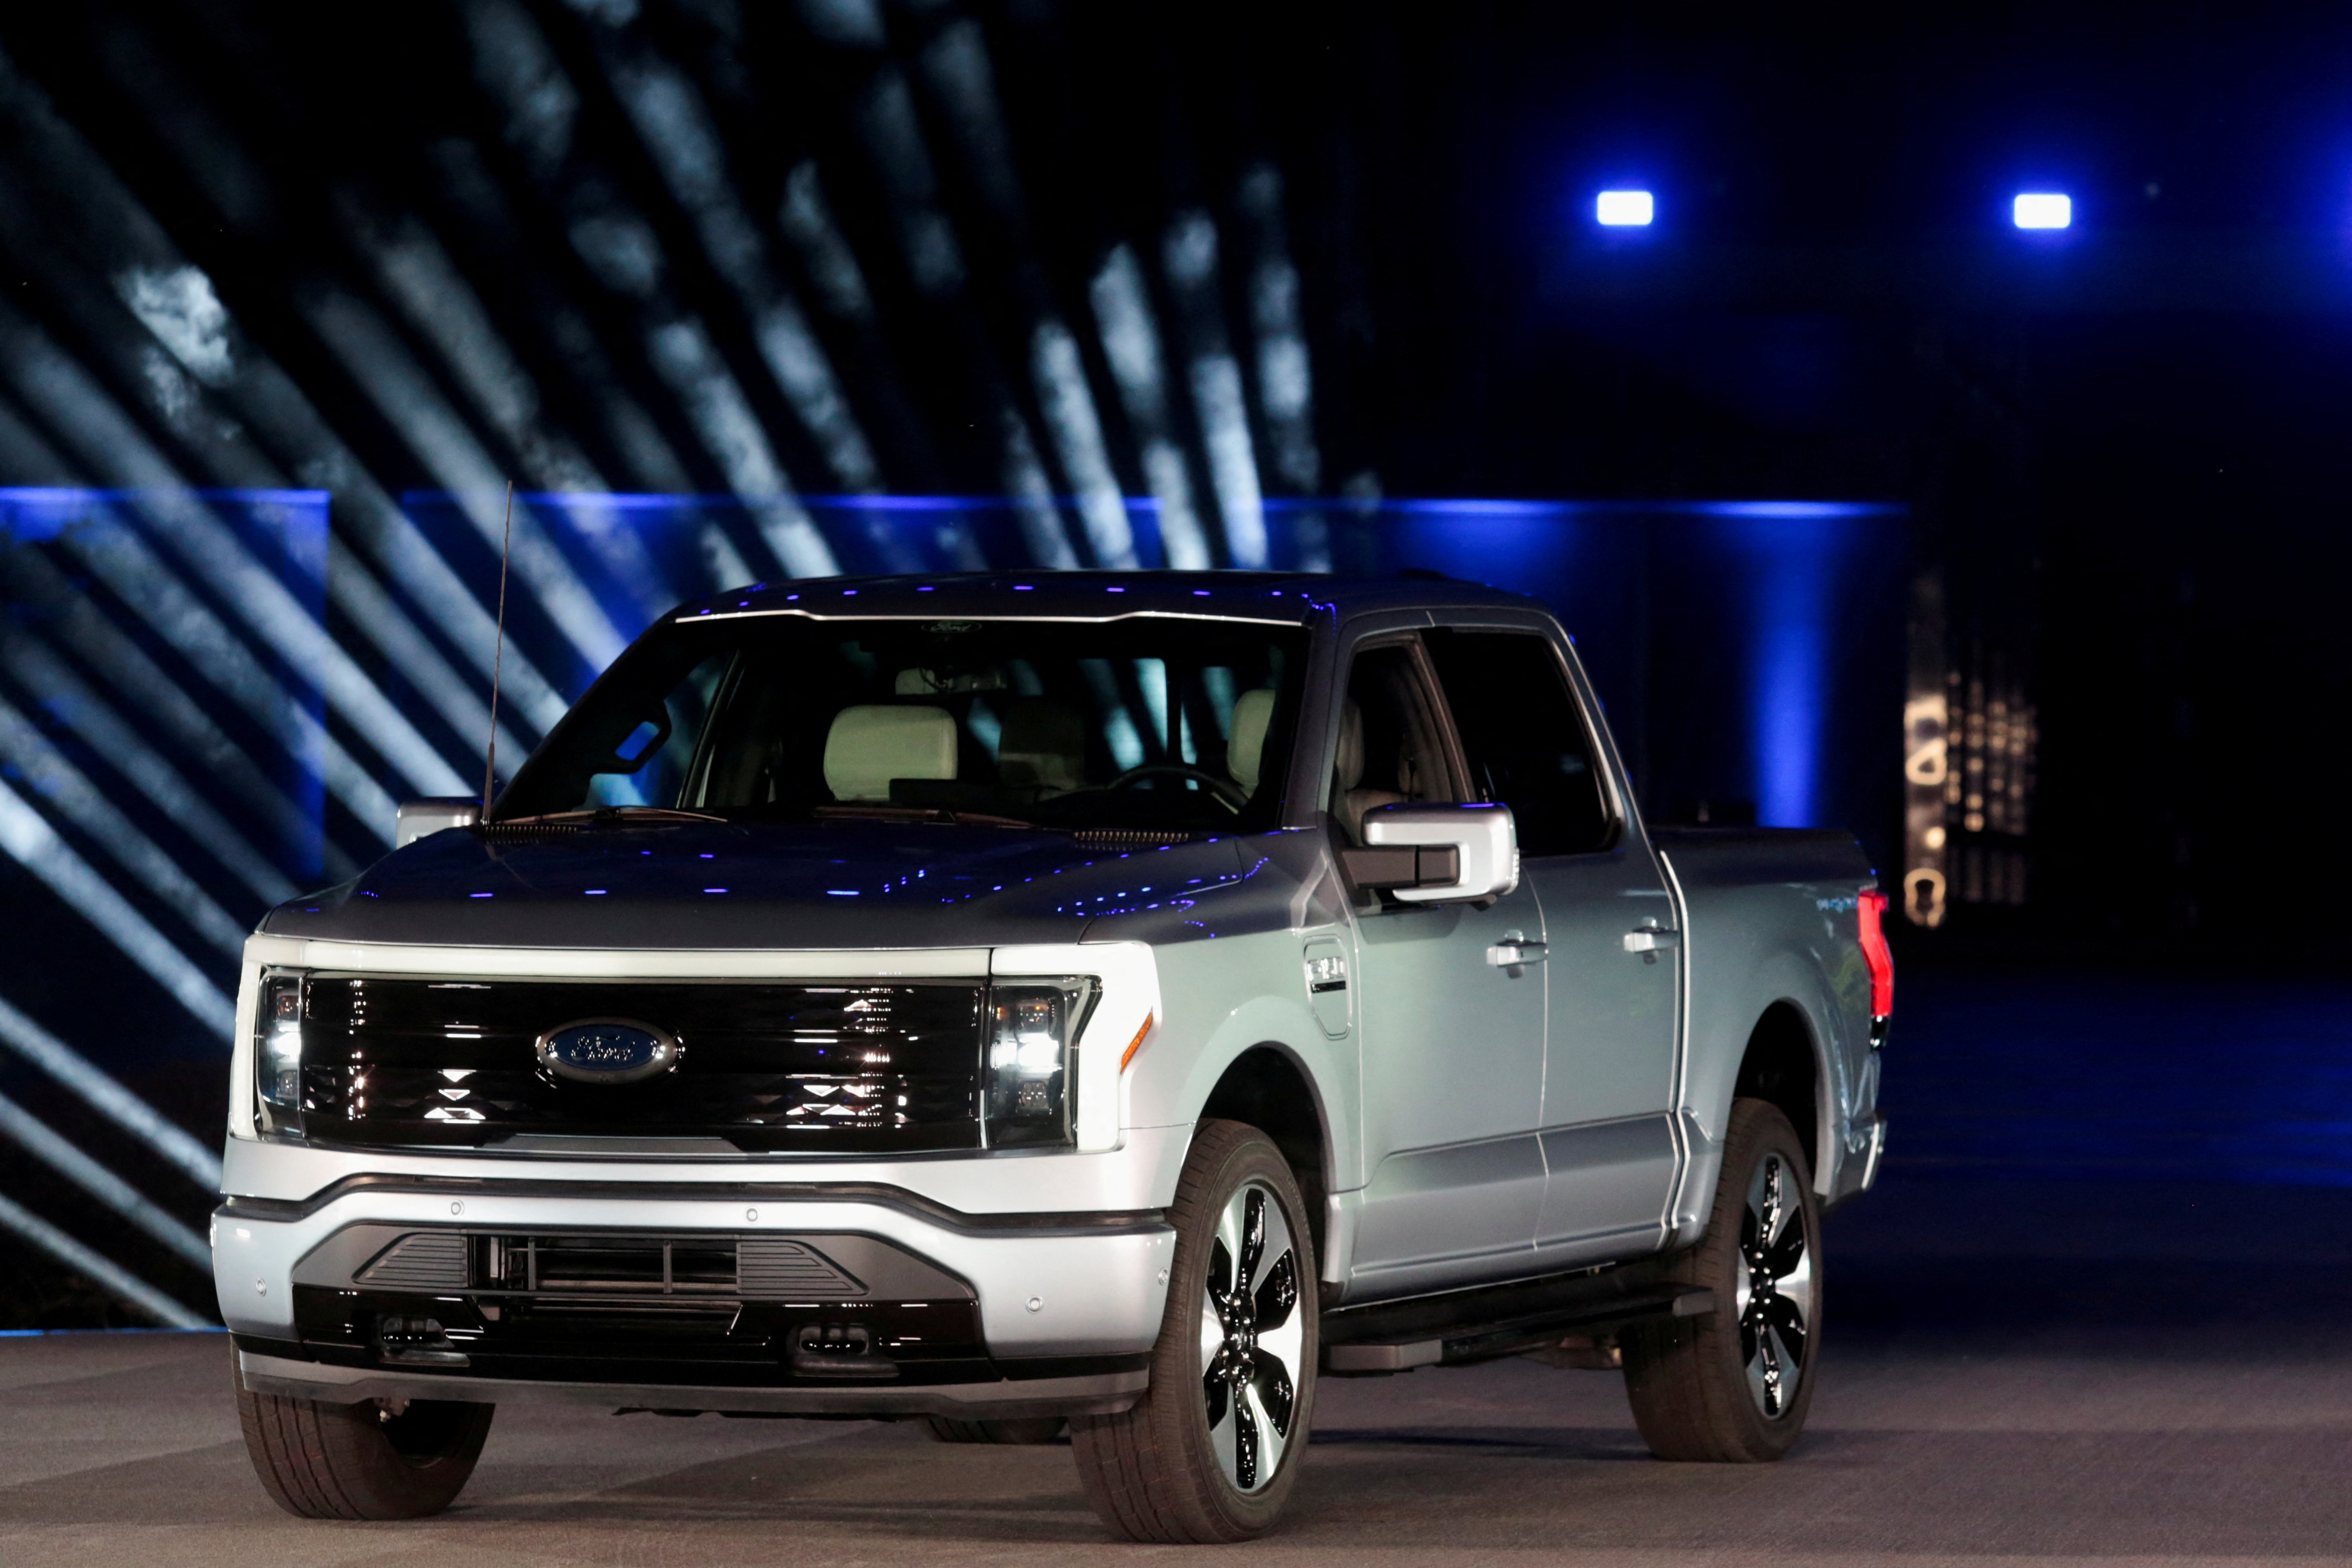 The introduction of the all-electric Ford F-150 Lightning pickup truck in Dearborn